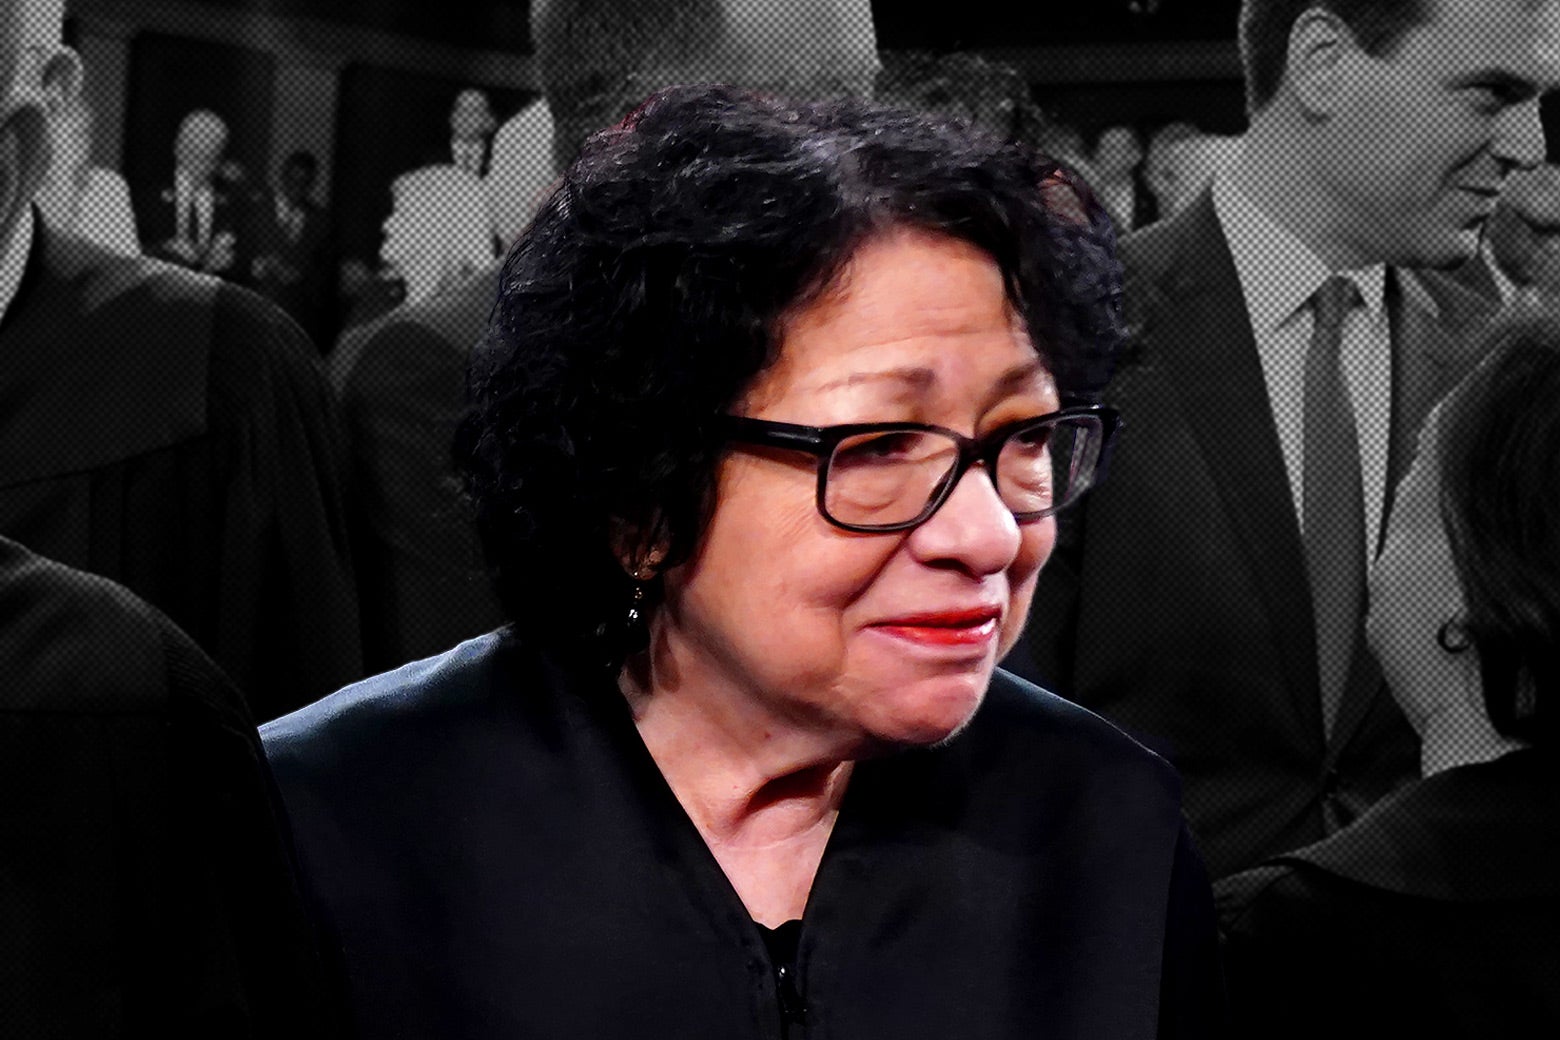 Sonia Sotomayor smiles looking off to the side; behind her in black and white is a crowded room.